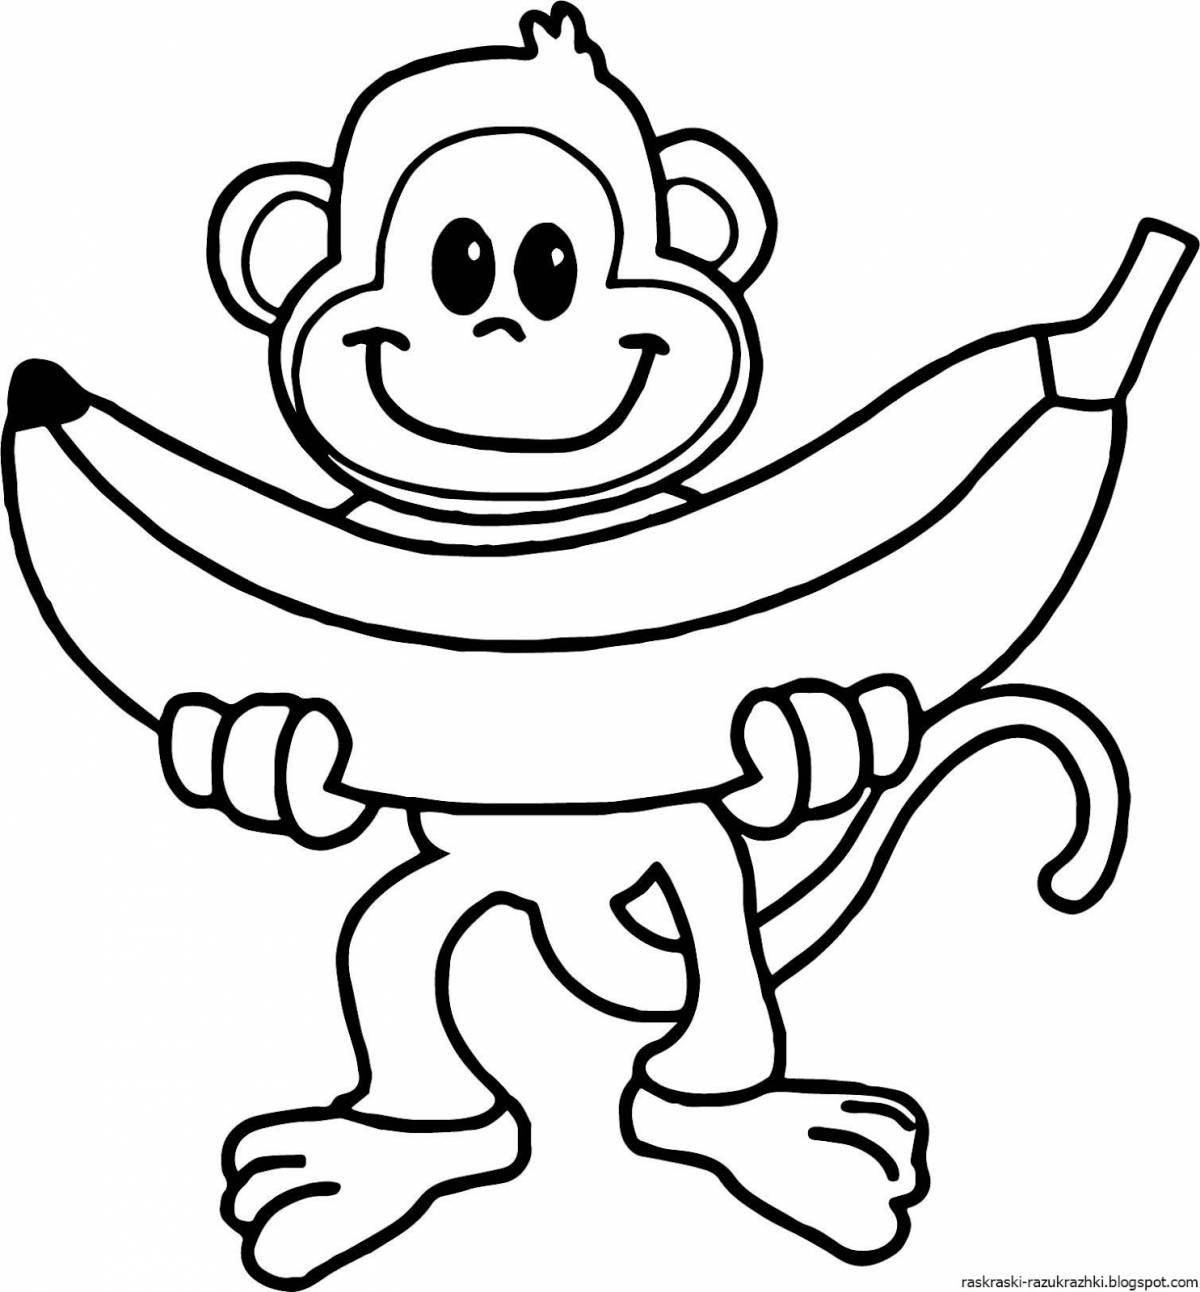 Crazy monkey coloring book for kids